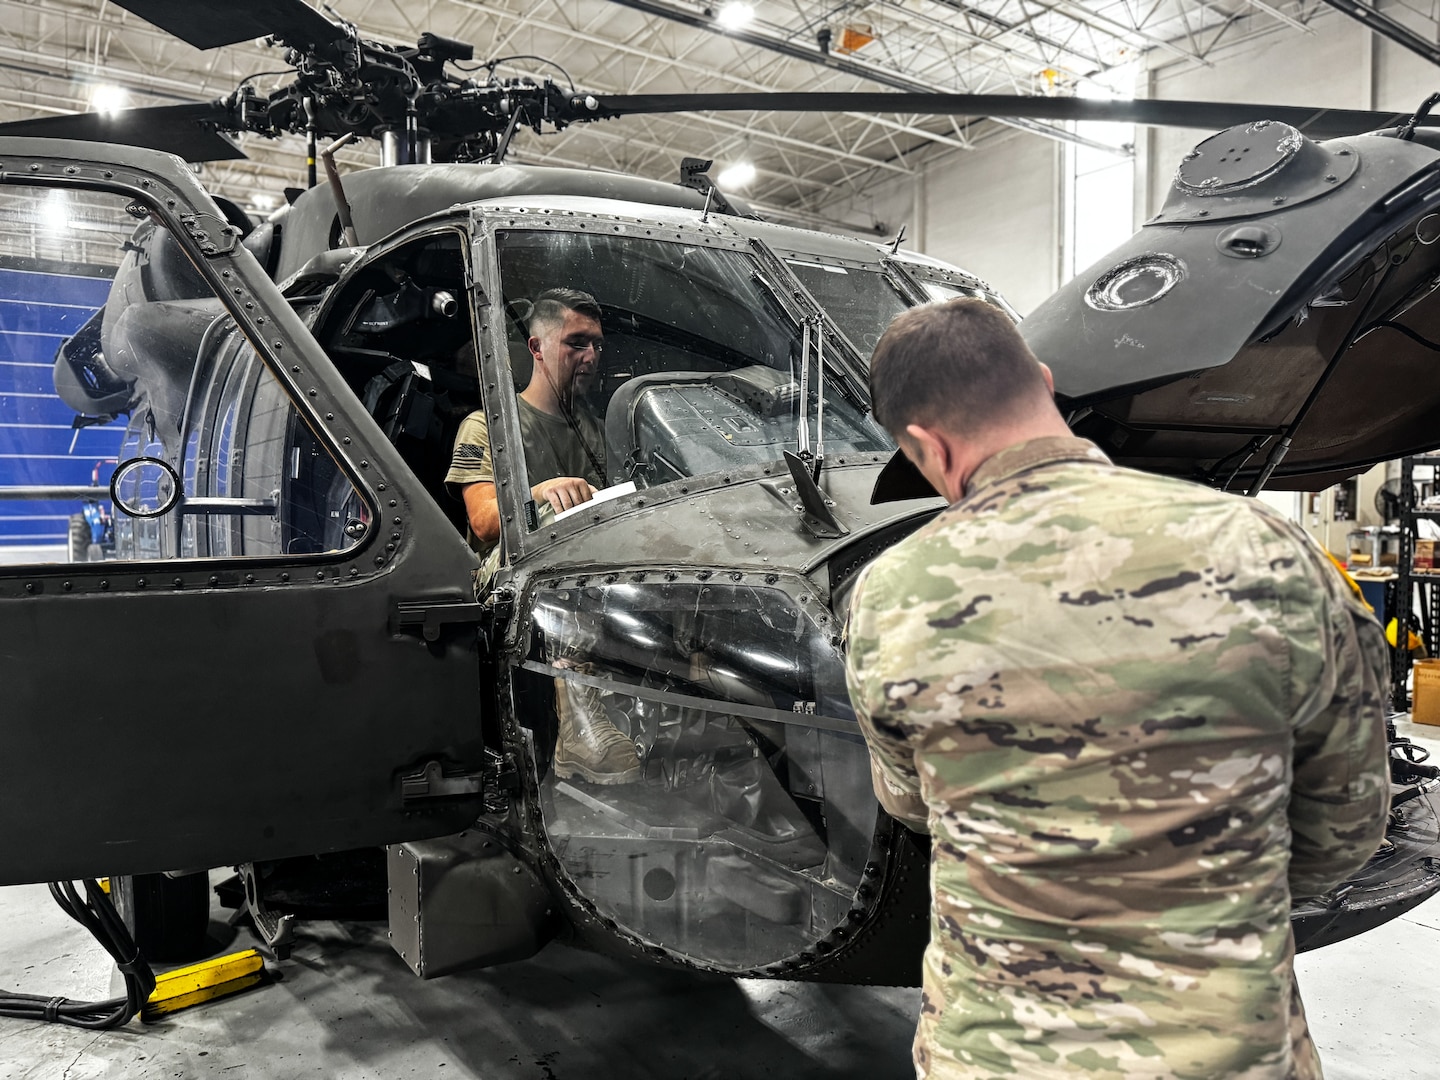 Virginia National Guard Soldiers conduct maintenance on a UH-60 Black Hawk helicopter April 2, 2024, at the Army Aviation Support Facility in Sandston, Virginia. The Soldiers are part of the AASF’s avionics shop, which troubleshoots, diagnoses and repairs avionic components and wiring on the VNG’s Black Hawk fleet. (U.S. Army National Guard photo by Sgt. 1st Class Terra C. Gatti)